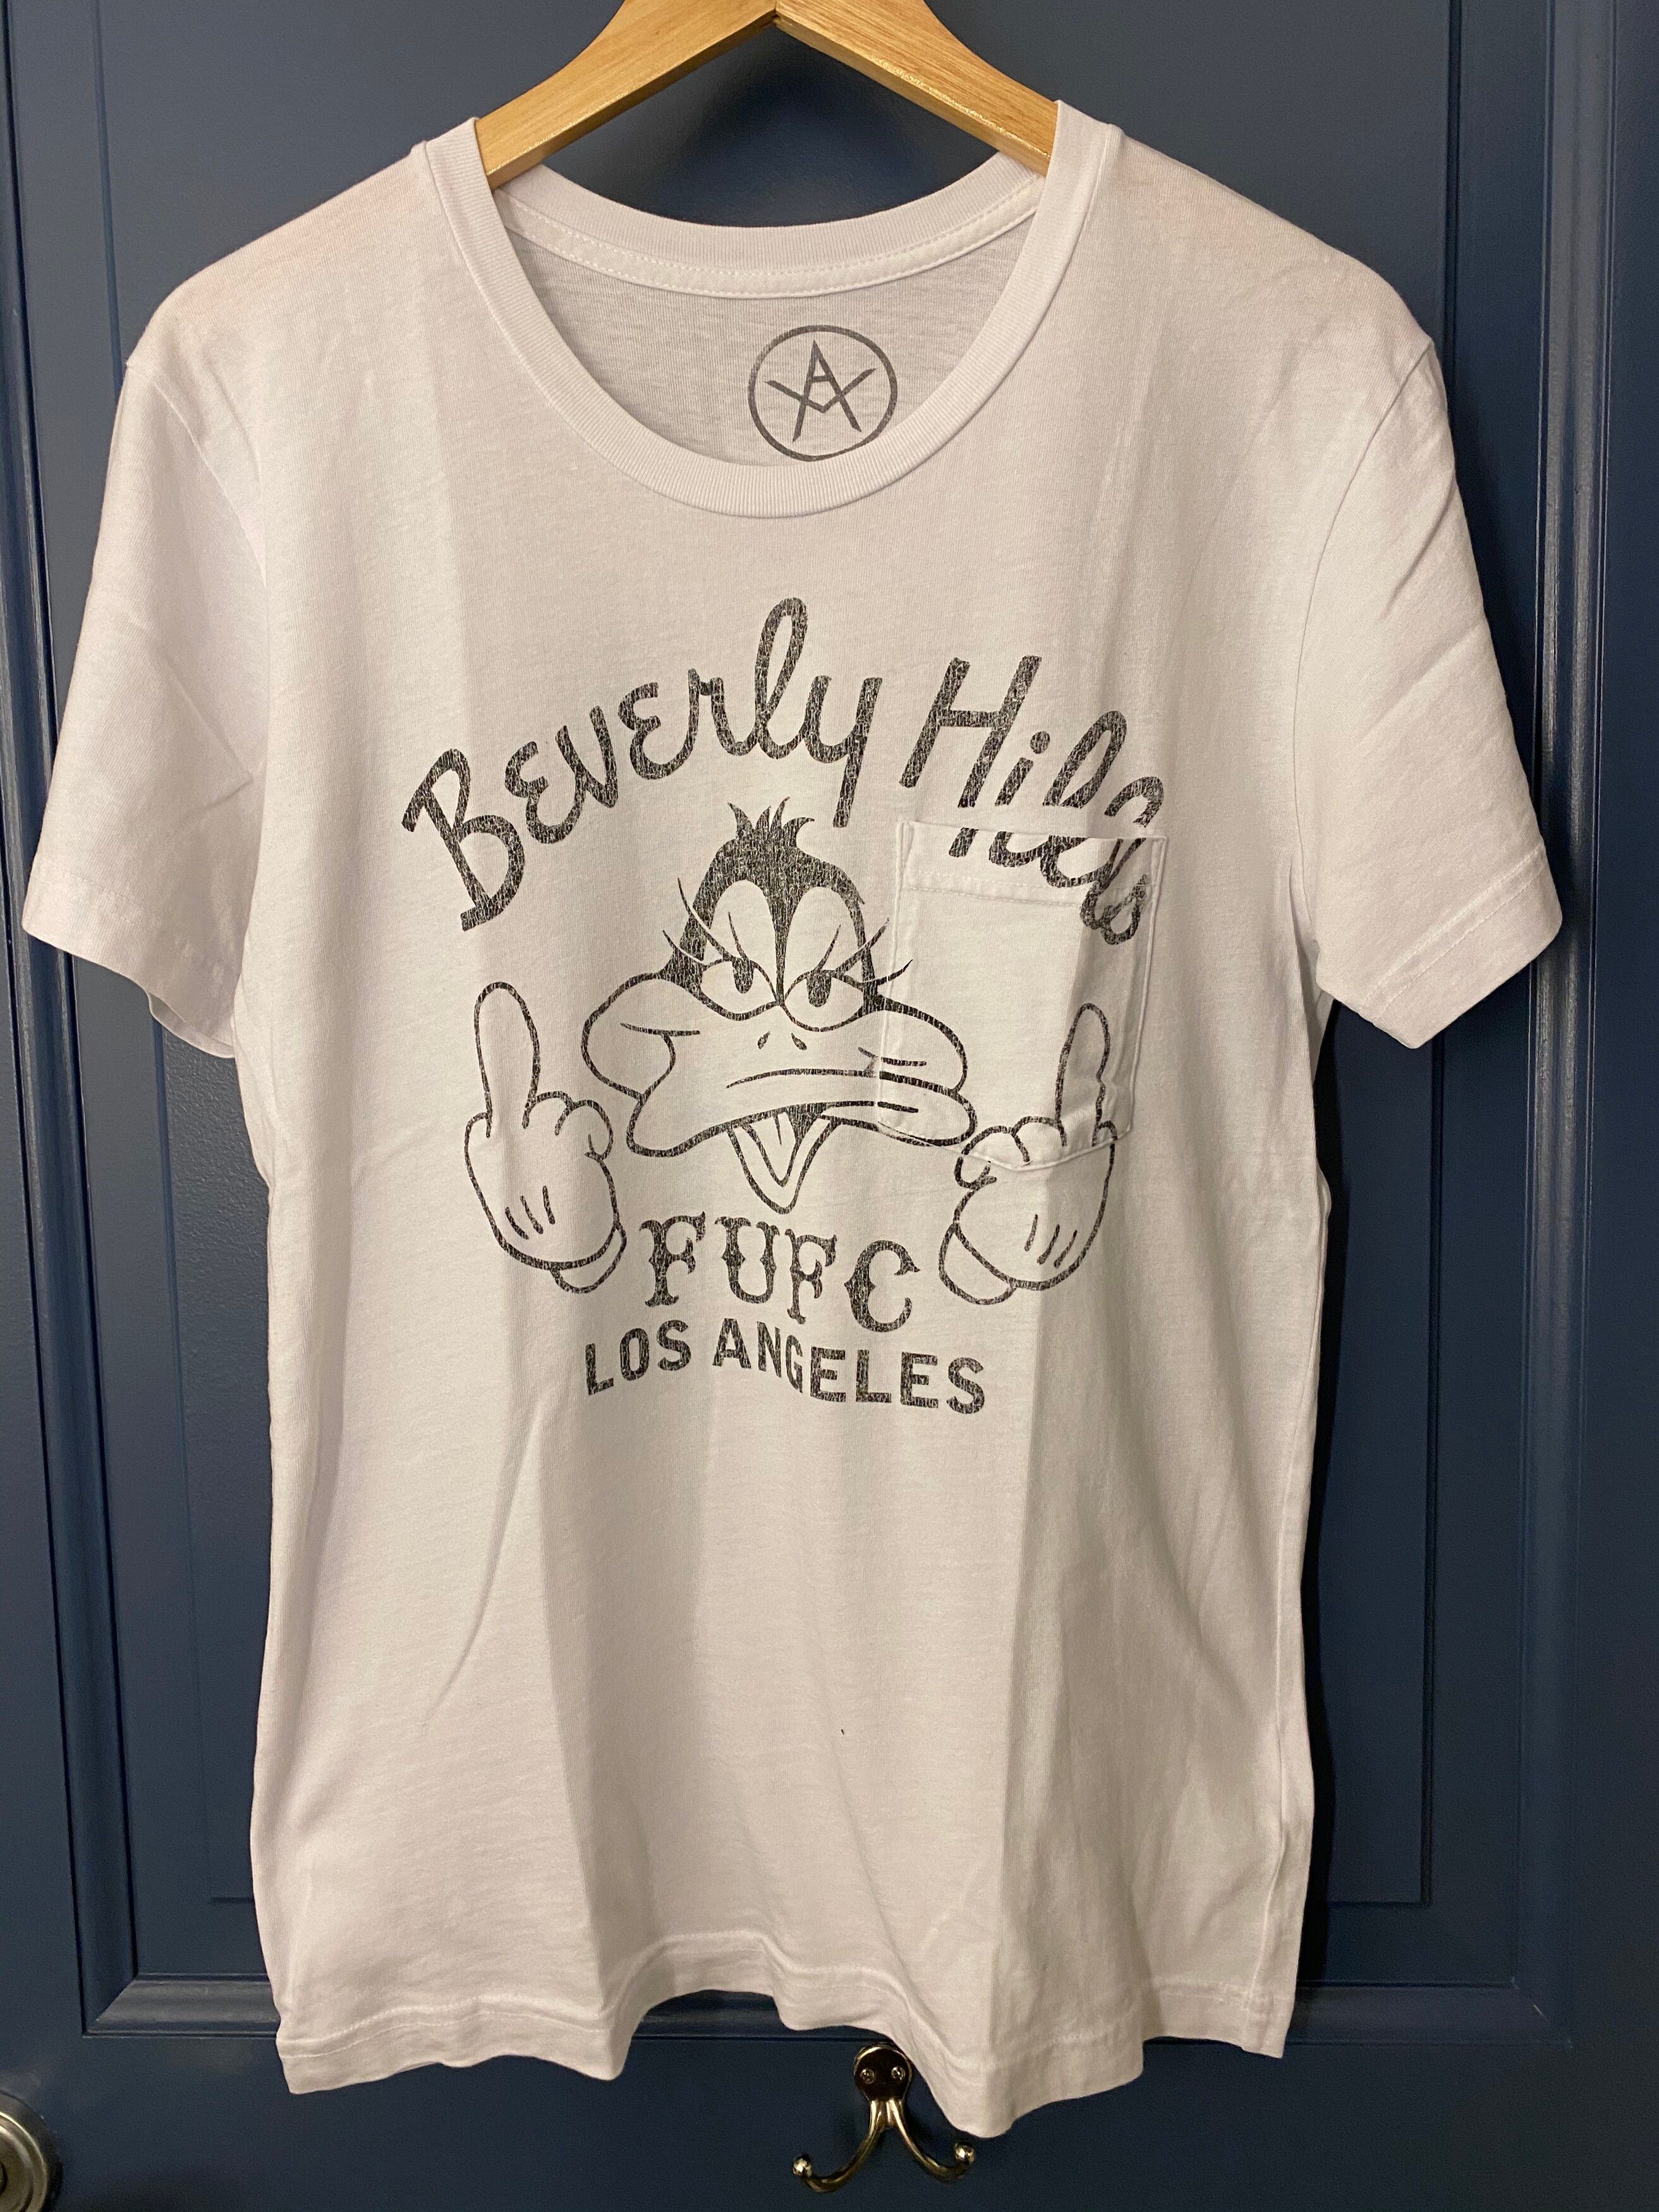 Local Authority Local Authority Beverly Hills 'FUFC' Tee Size US S / EU 44-46 / 1 - 1 Preview